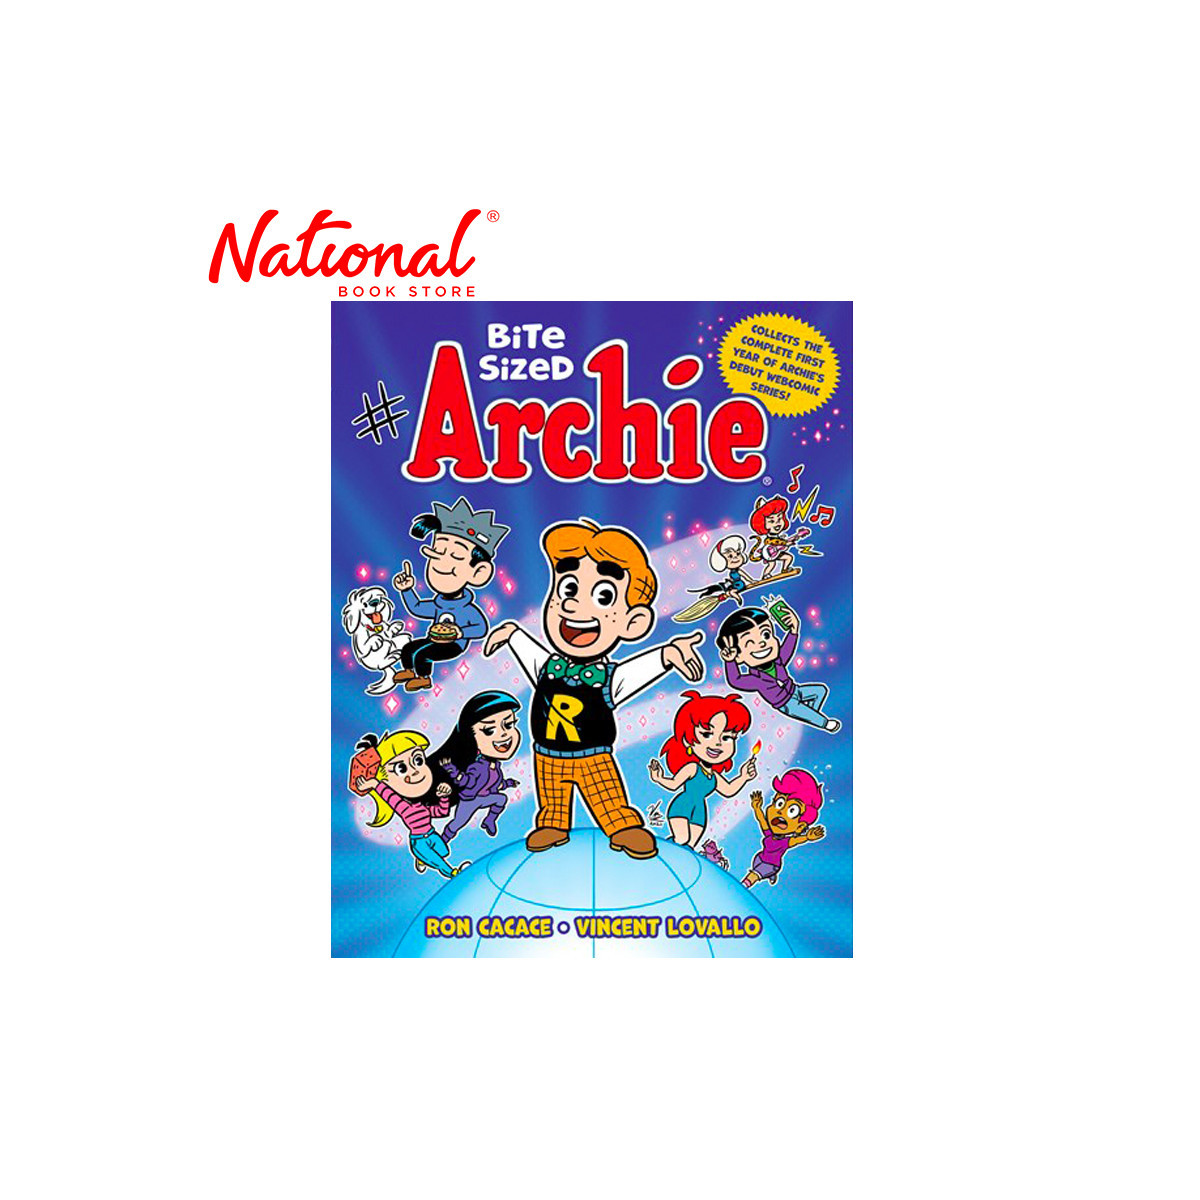 *PRE-ORDER* Bite Sized Archie Volume 1 Trade Paperback by Ron Cacace - Books for Kids